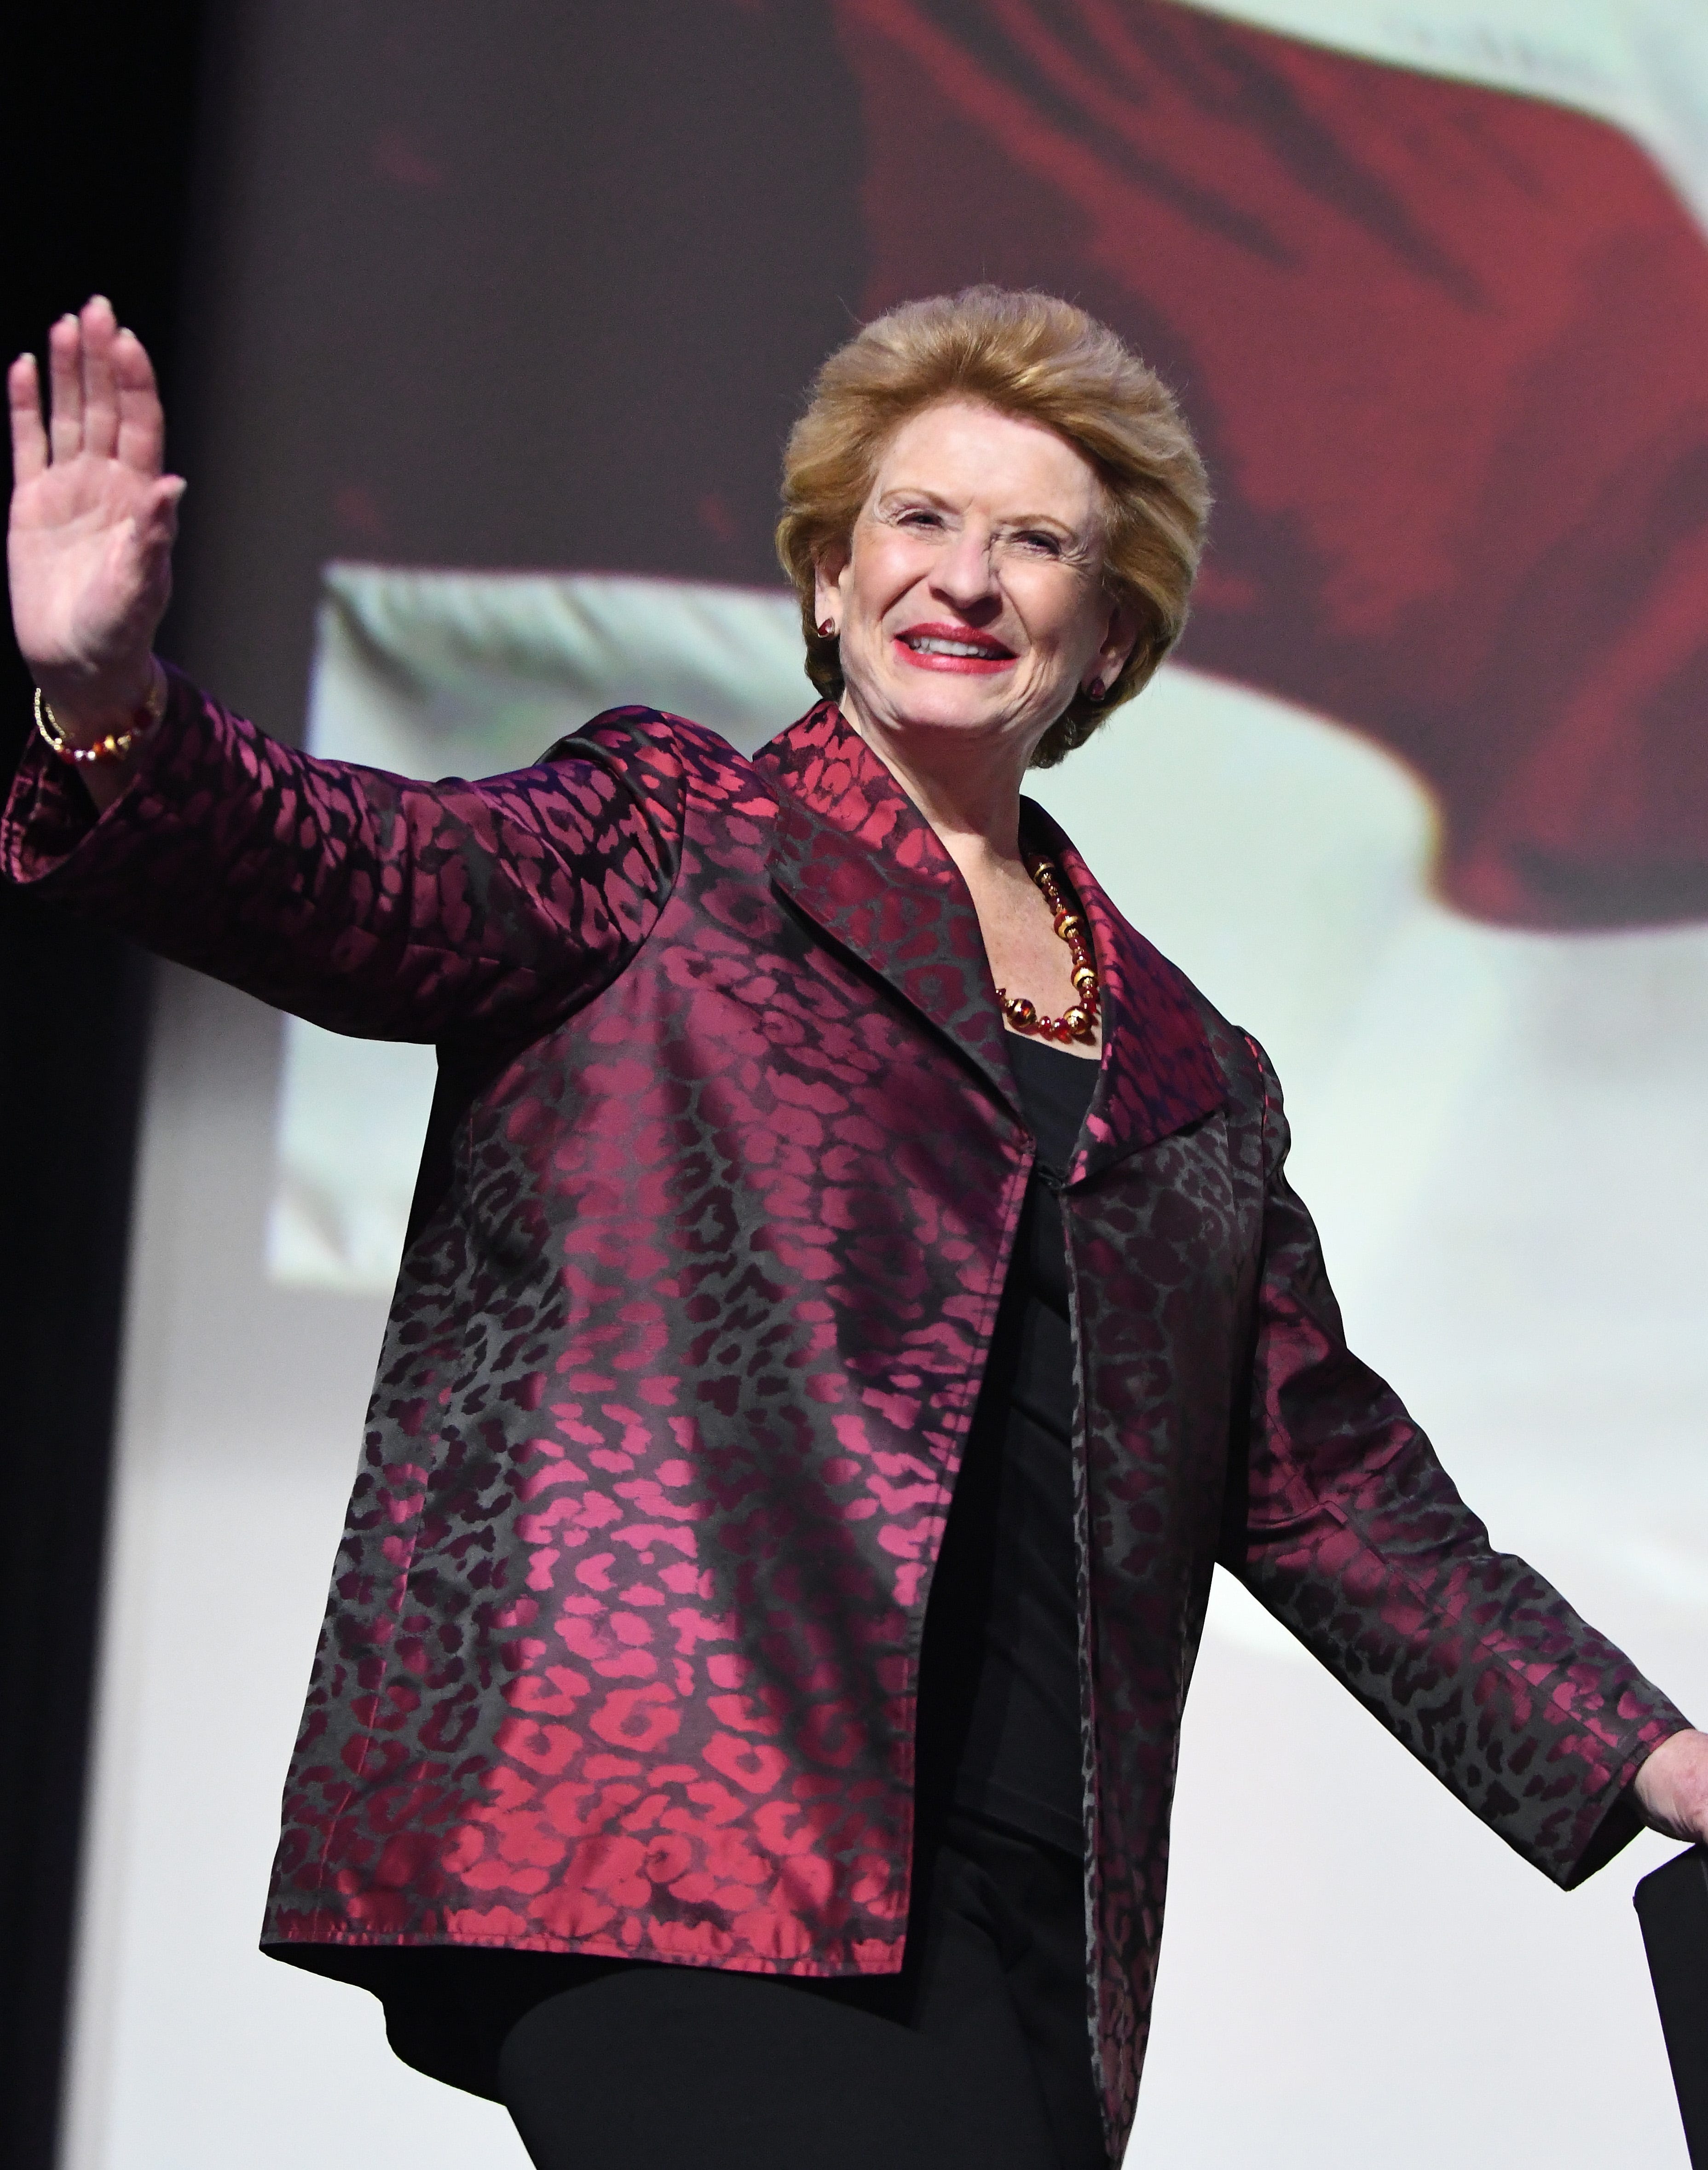 U.S. Senator Debbie Stabenow makes her way on stage after winning her race against John James. She joined  Democratic Party candidates at the Sound Board theater in the MotorCity Casino in Detroit Tuesday night.